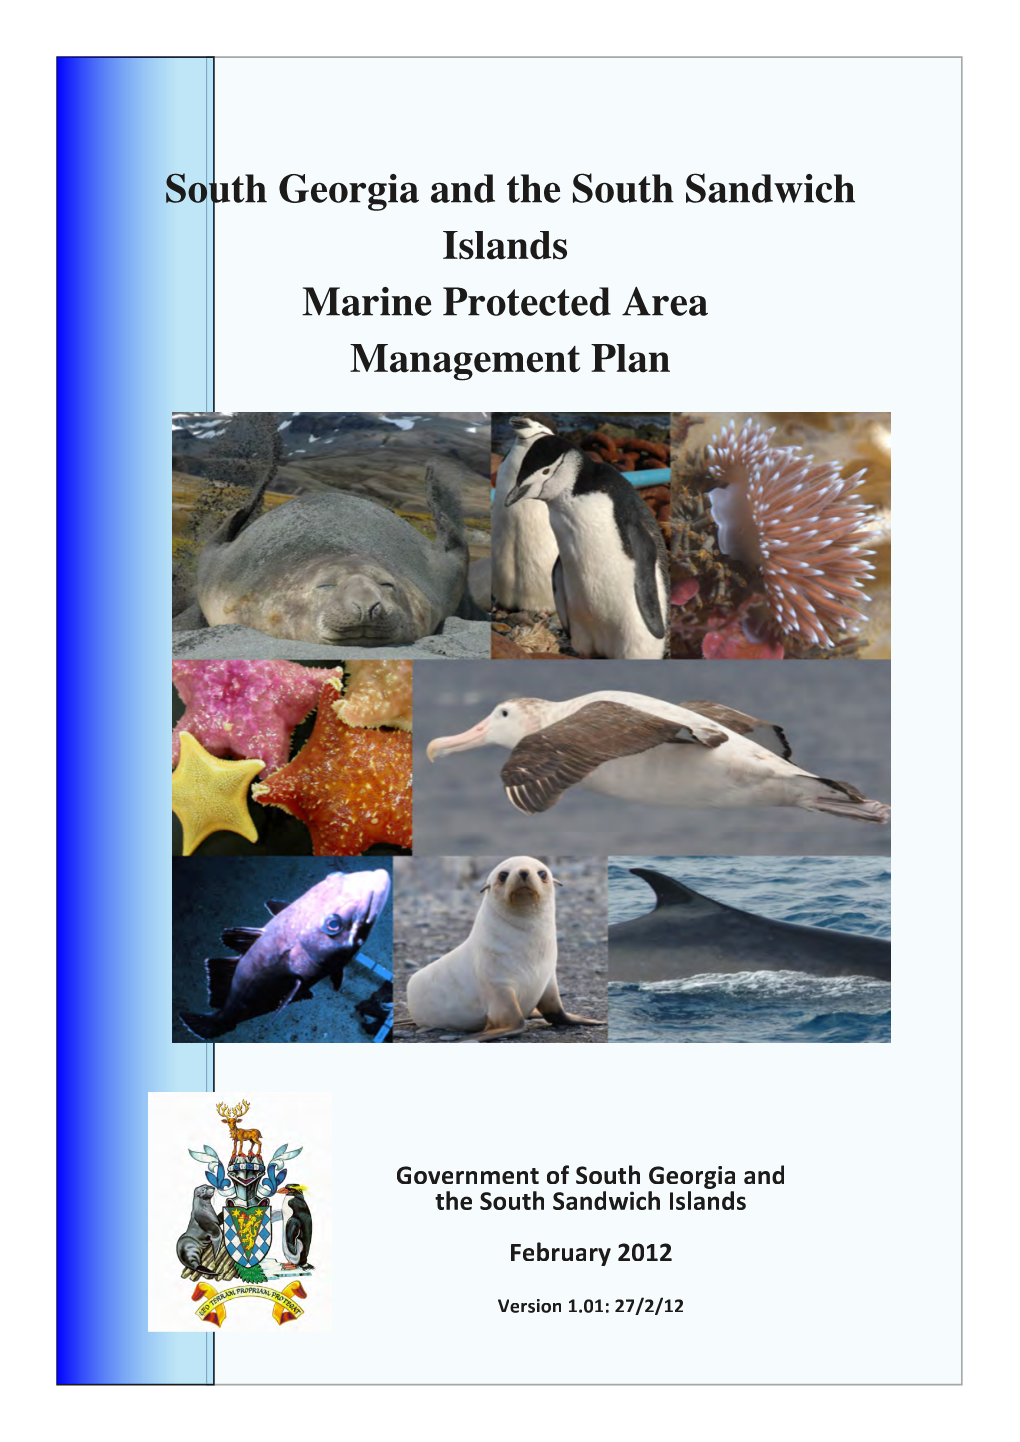 South Georgia and the South Sandwich Islands Marine Protected Area Management Plan 2